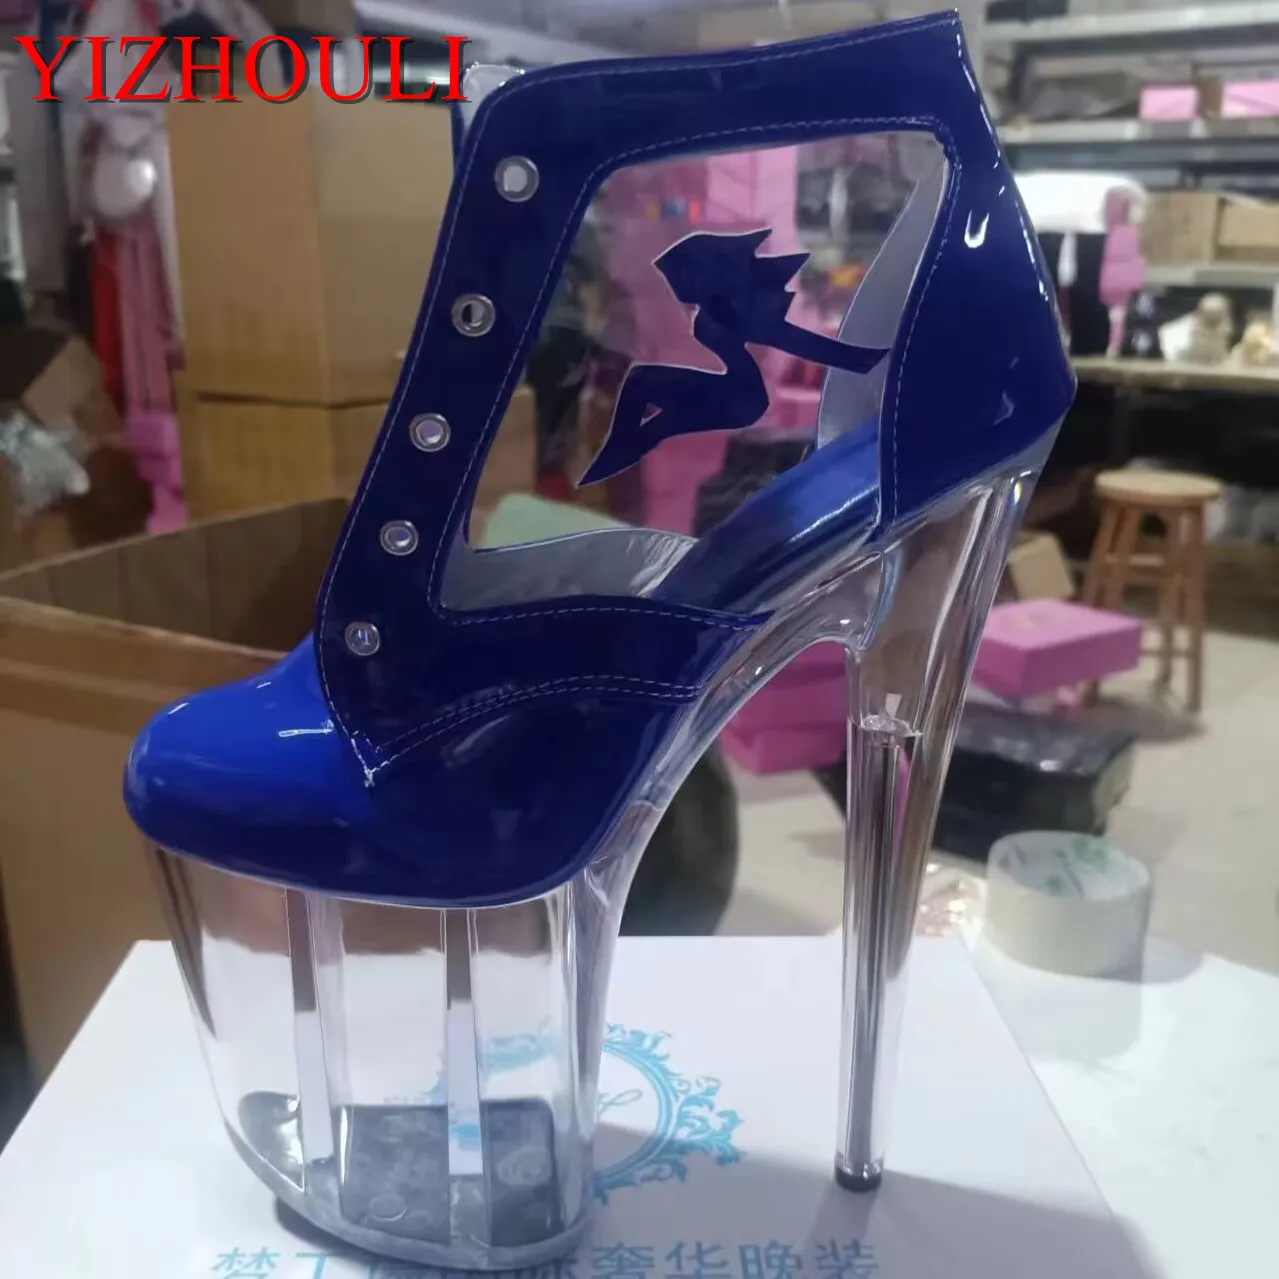 summer-20cm-sexy-roman-shoes-transparent-soles-nightclub-pole-dance-performance-model-shooting-sexy-dance-shoes